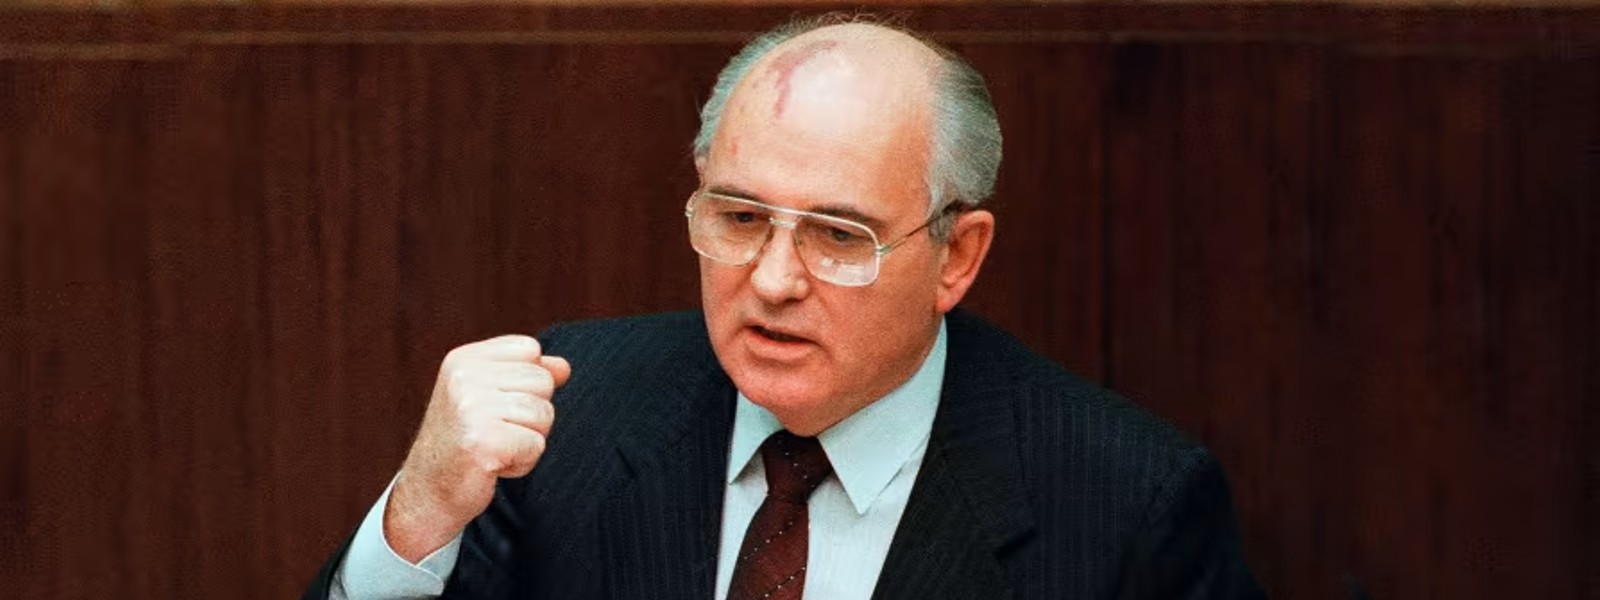 Mikhail Gorbachev, the first and only president of the Soviet Union, has died